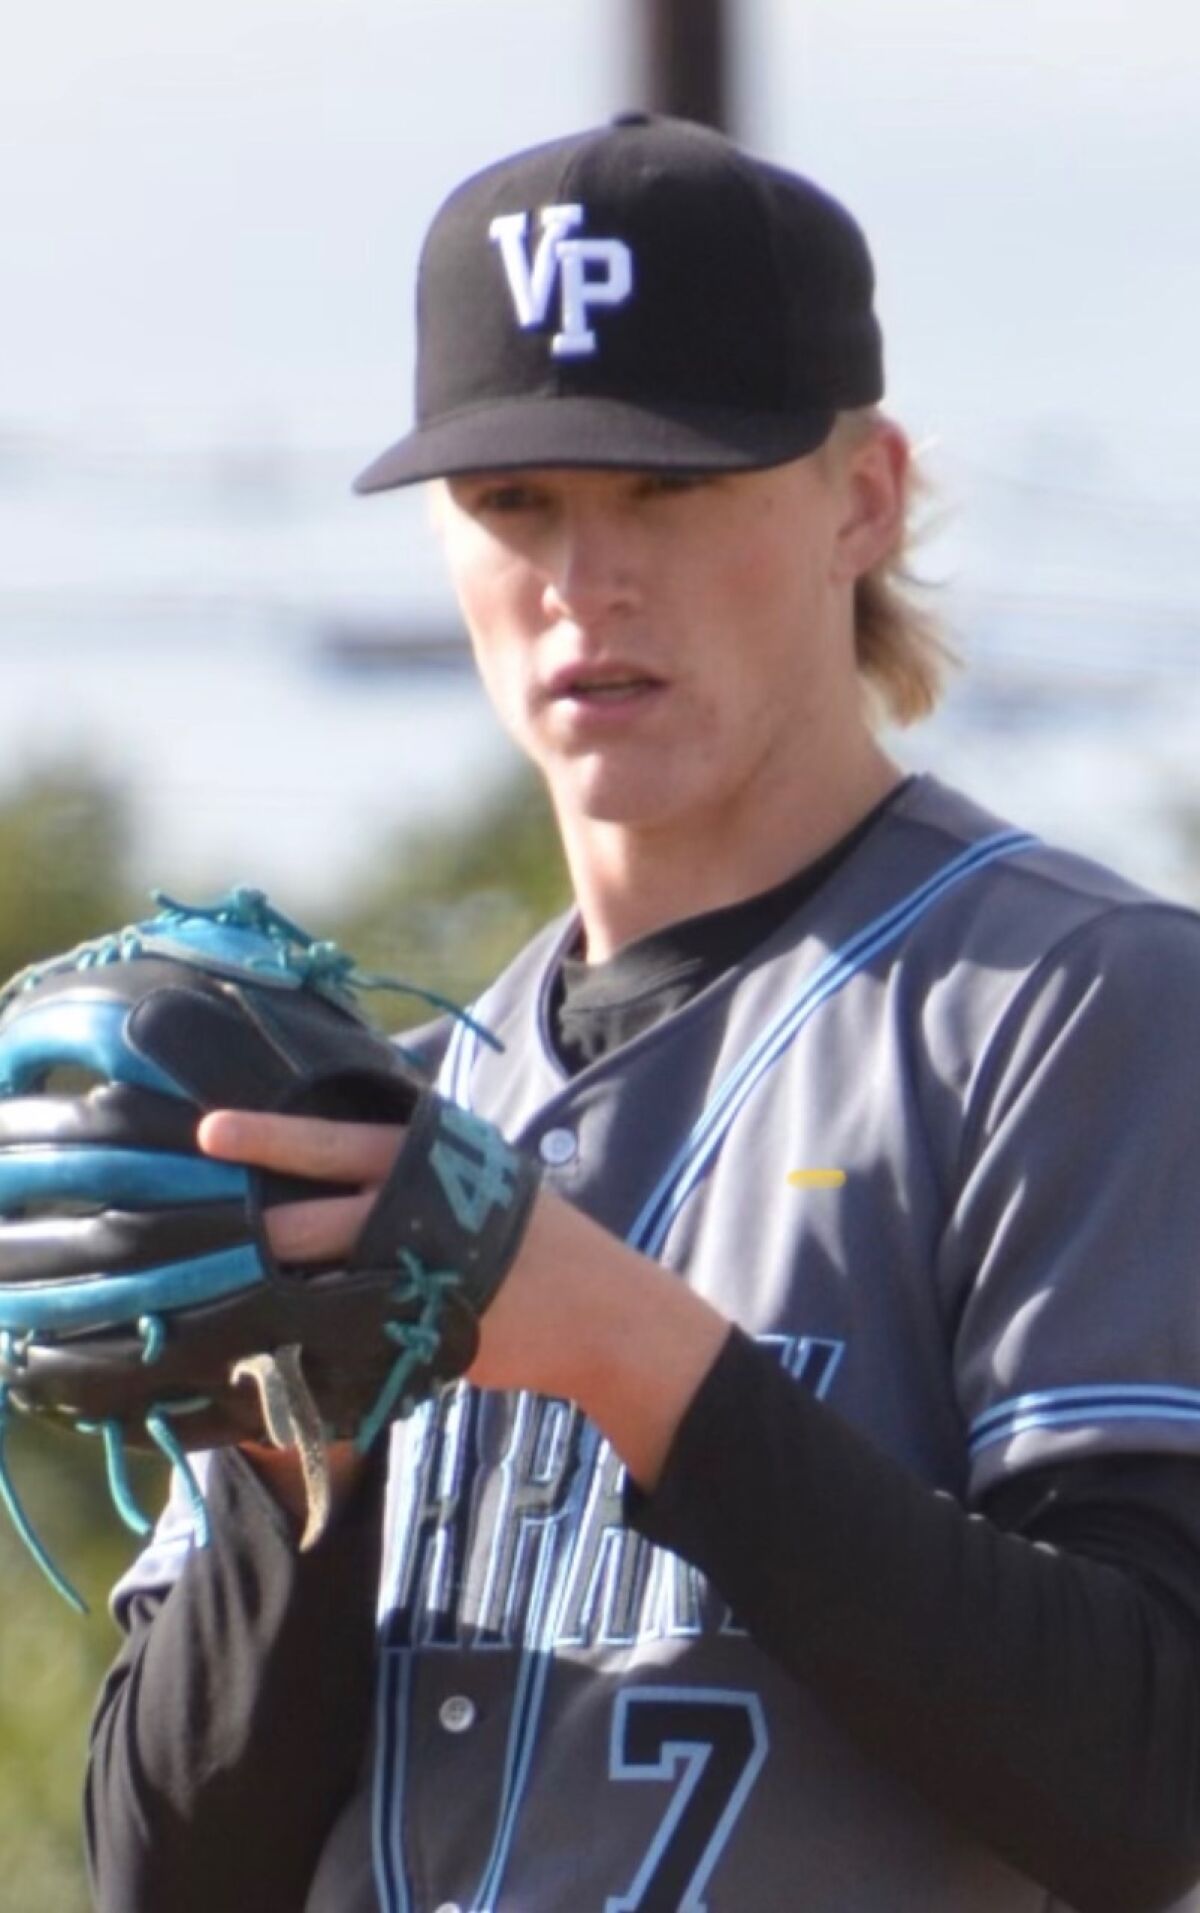 Zach Brown of Villa Park struck out 11 on Wednesday in a 5-0 win over Yorba Linda.